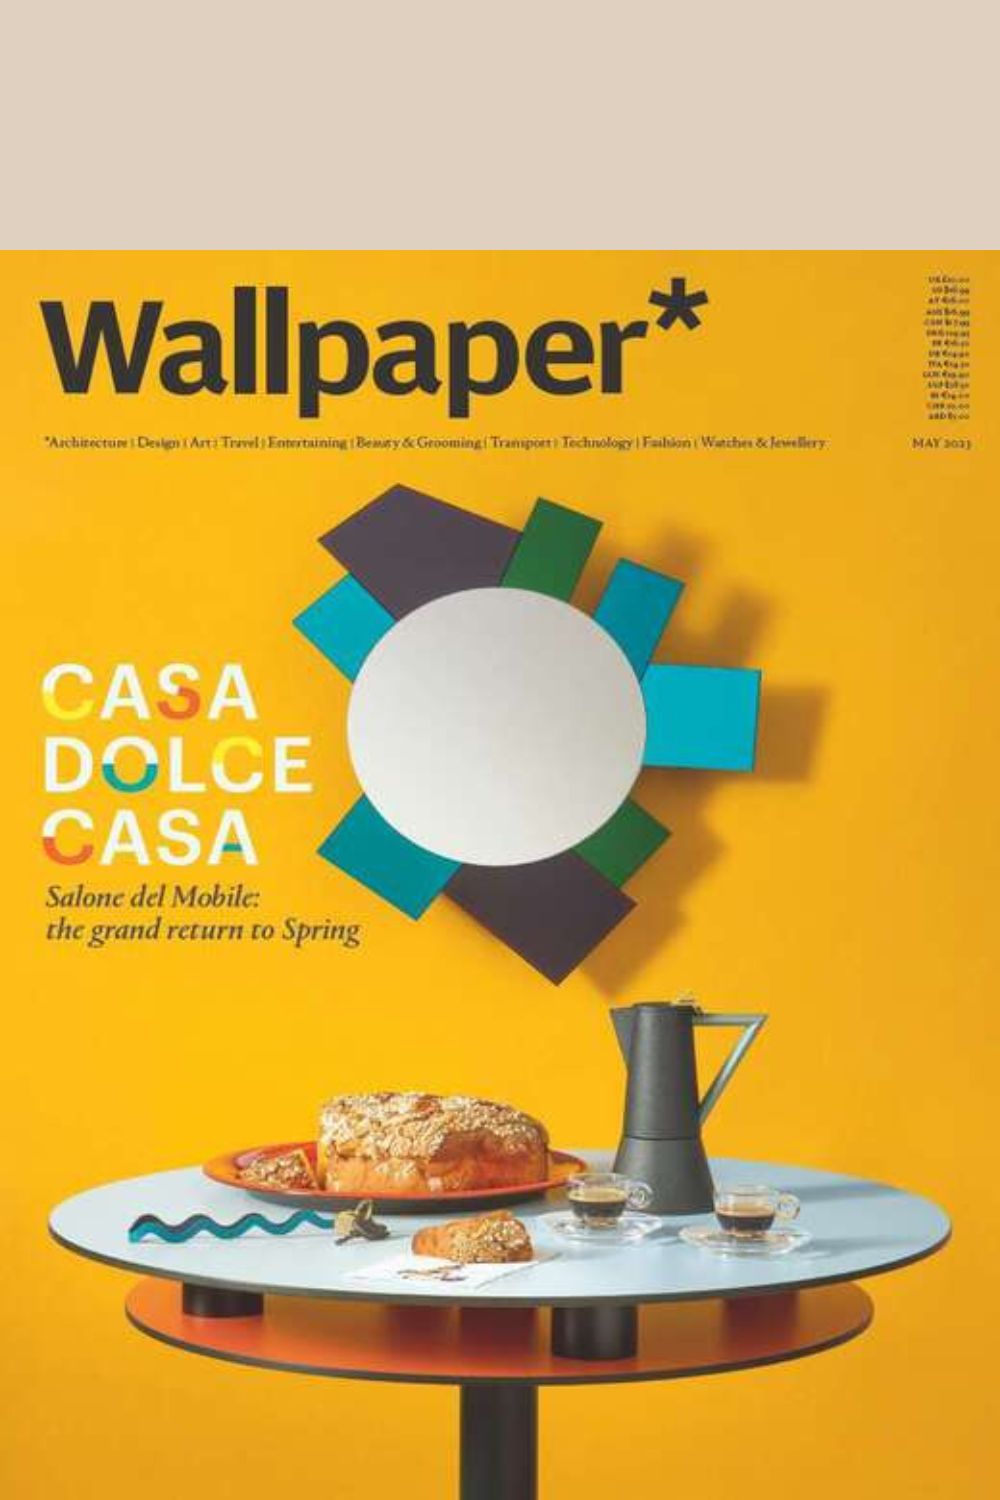 Wallpaper* Magazine May 2023 issue